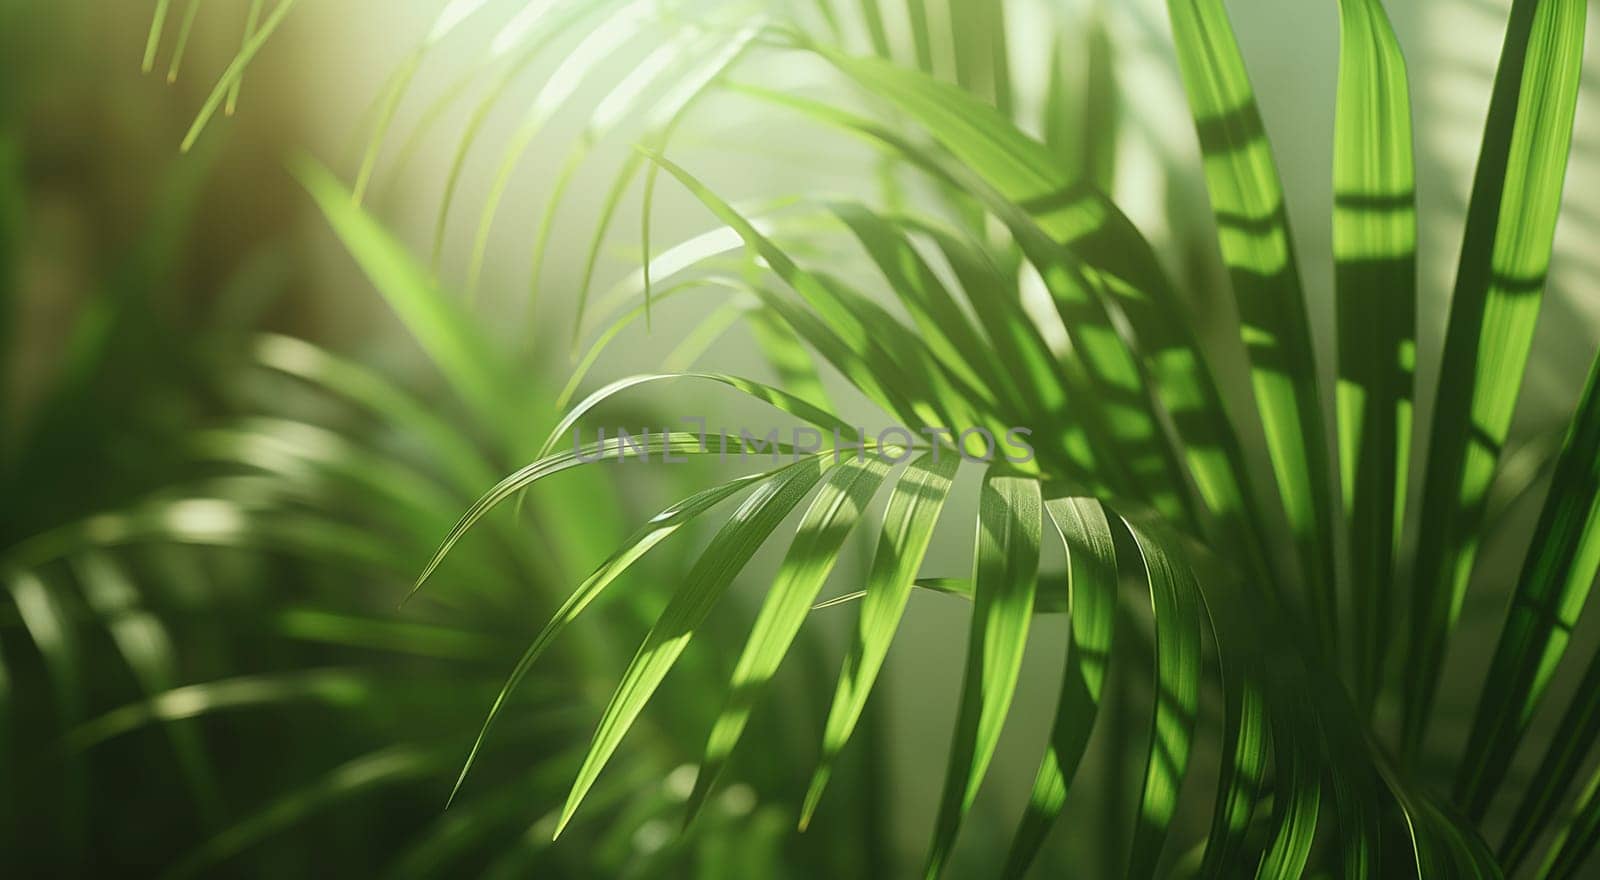 Lush green palm leaves bask in vibrant sunlight with a soft-focus background by kizuneko